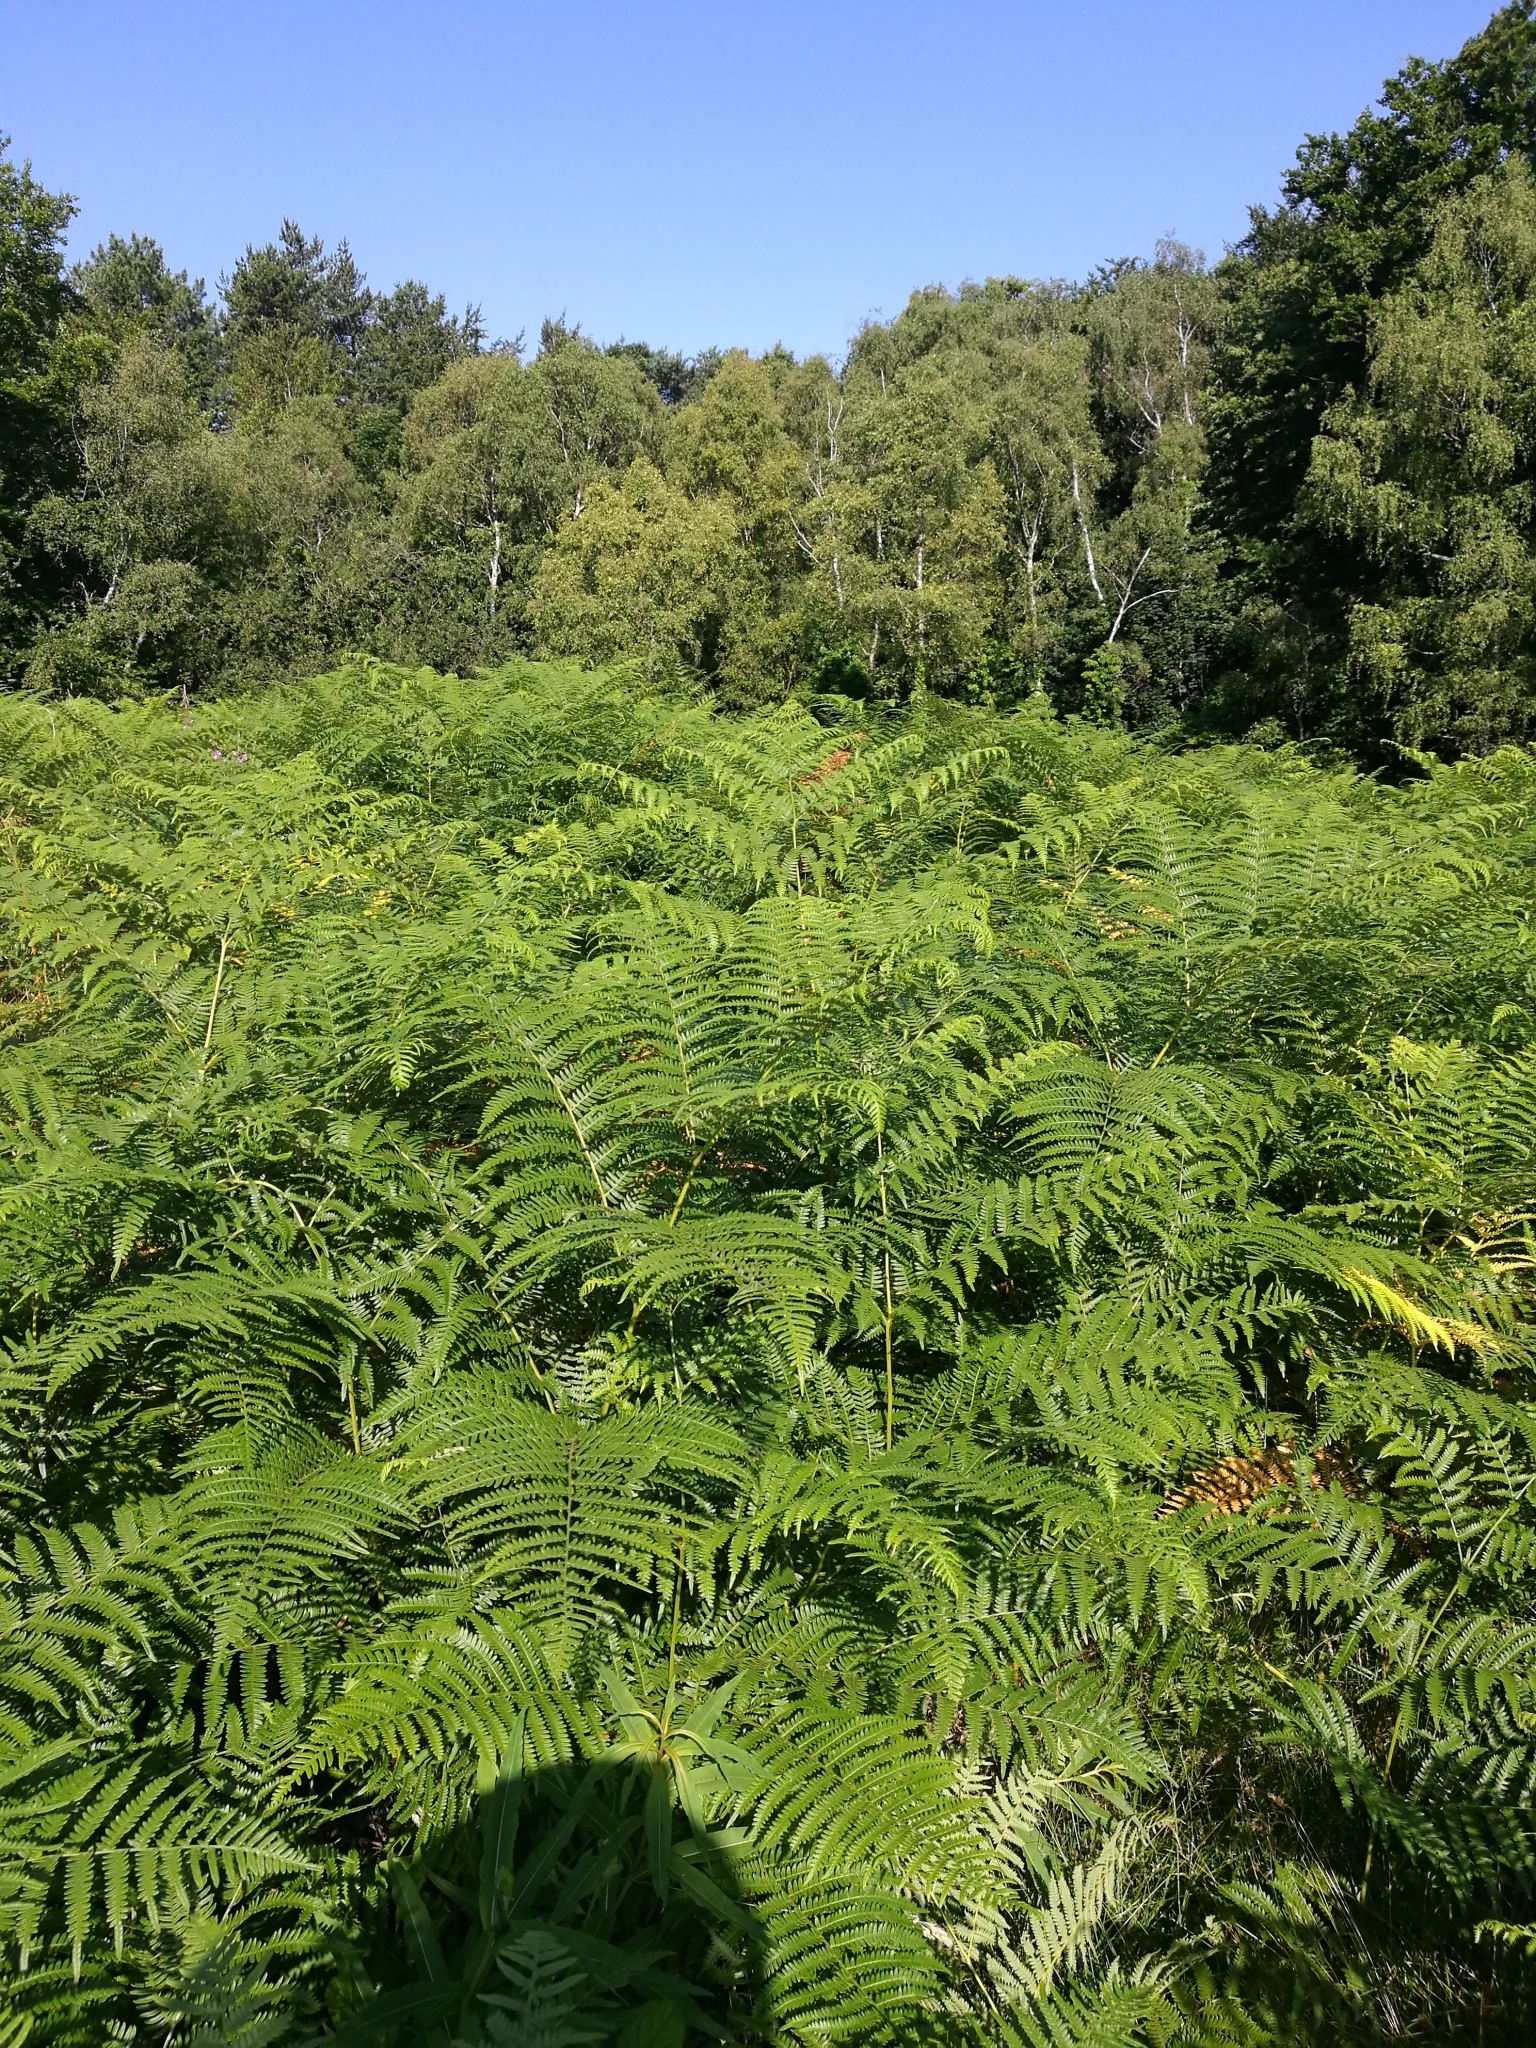 A photo from the FoTF Conservation Event - July 2021 - Maintenance tasks at Rex Graham Reserve : A shot of tall Bracken plants with a line of trees in the background